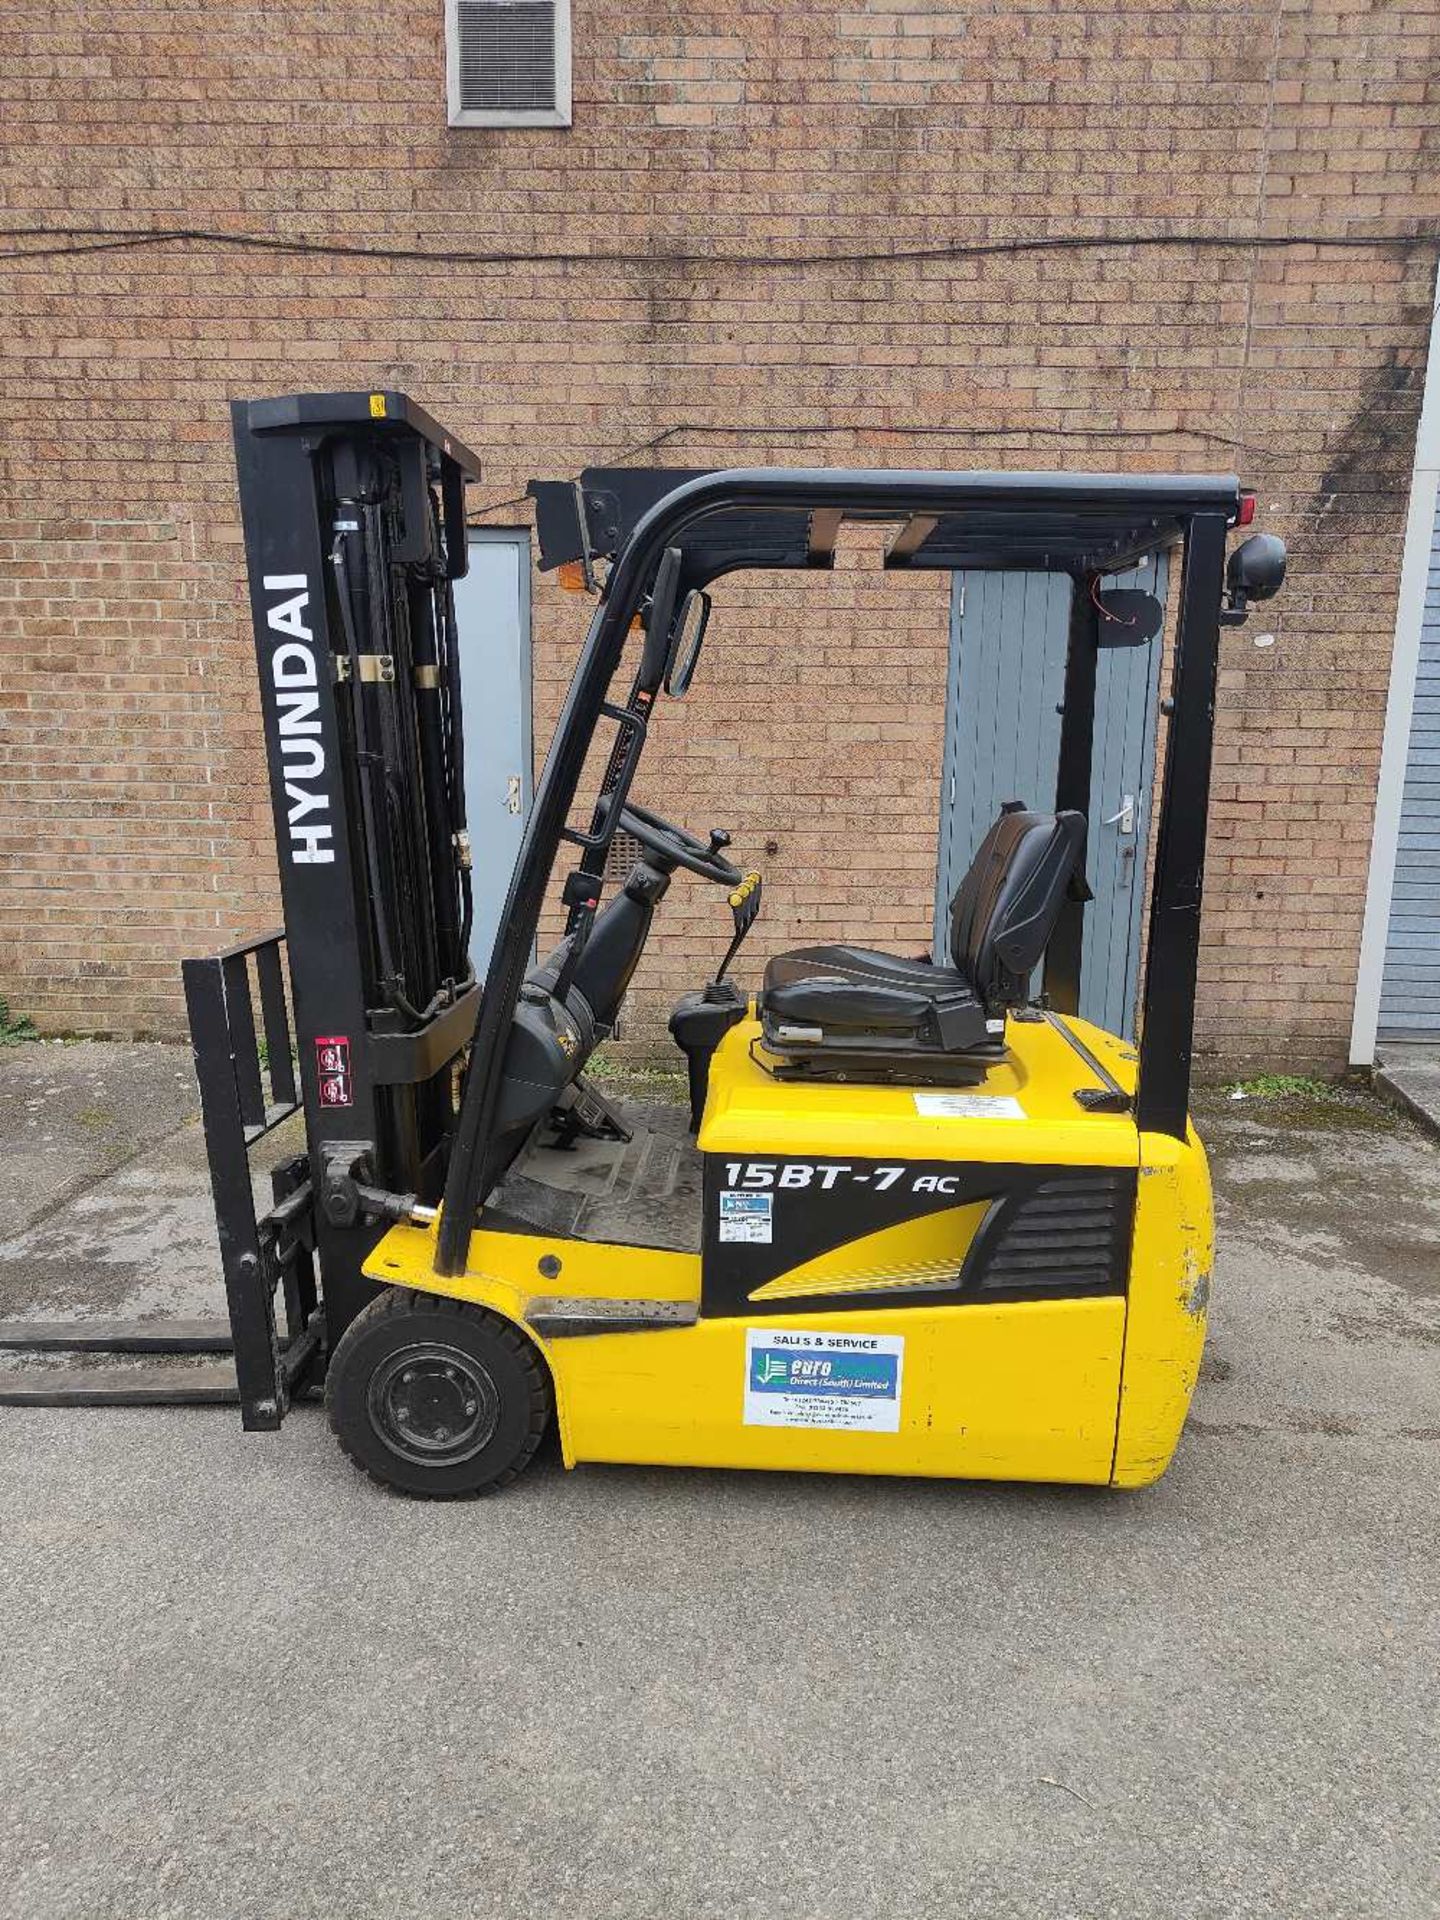 Hyundai 15BT-7 Electric Forklift - Image 3 of 12